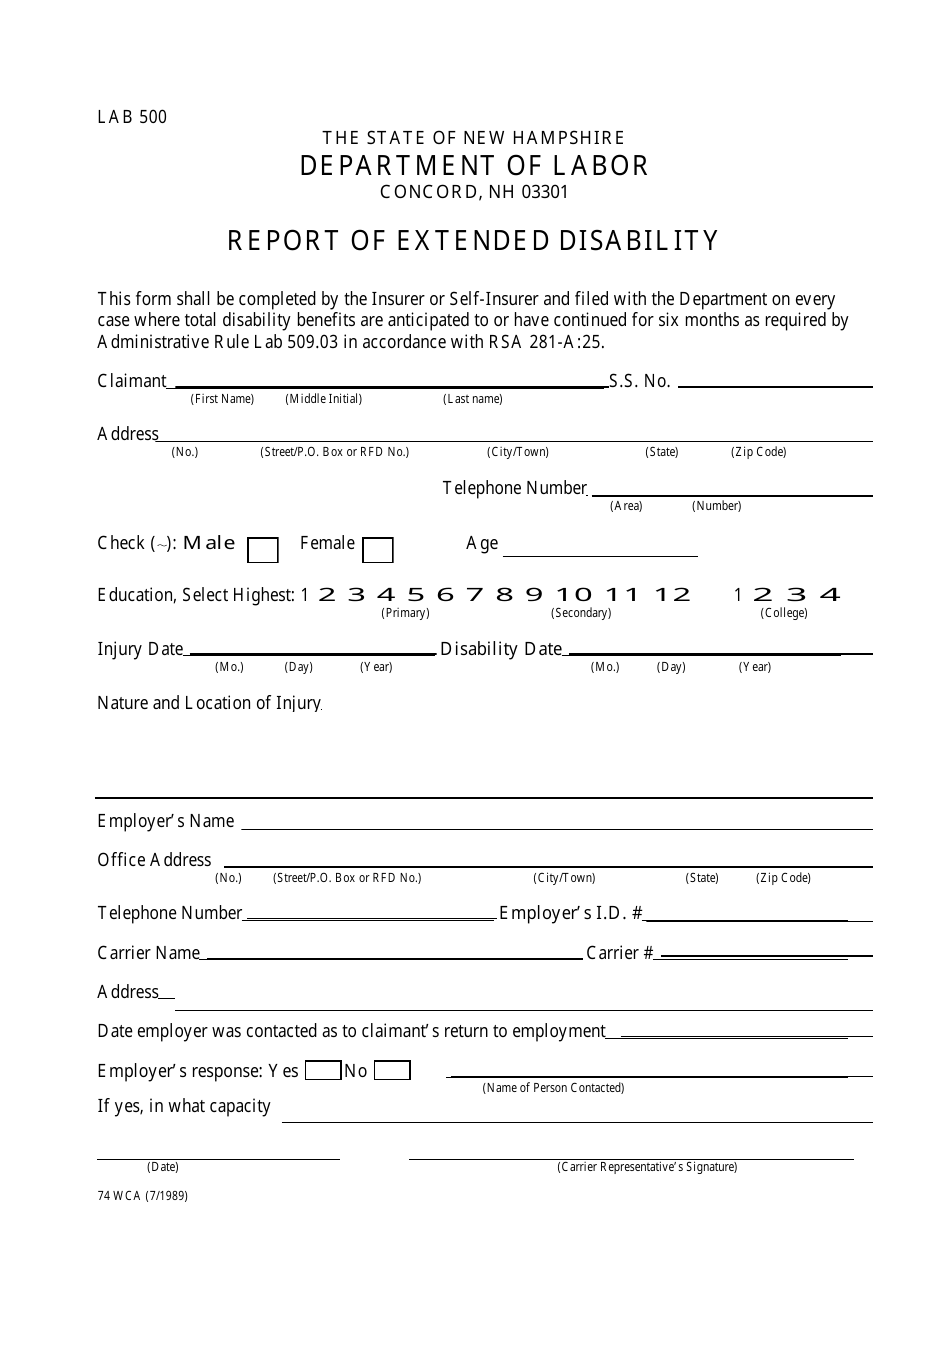 Form 74 WCA Report of Extended Disability - New Hampshire, Page 1